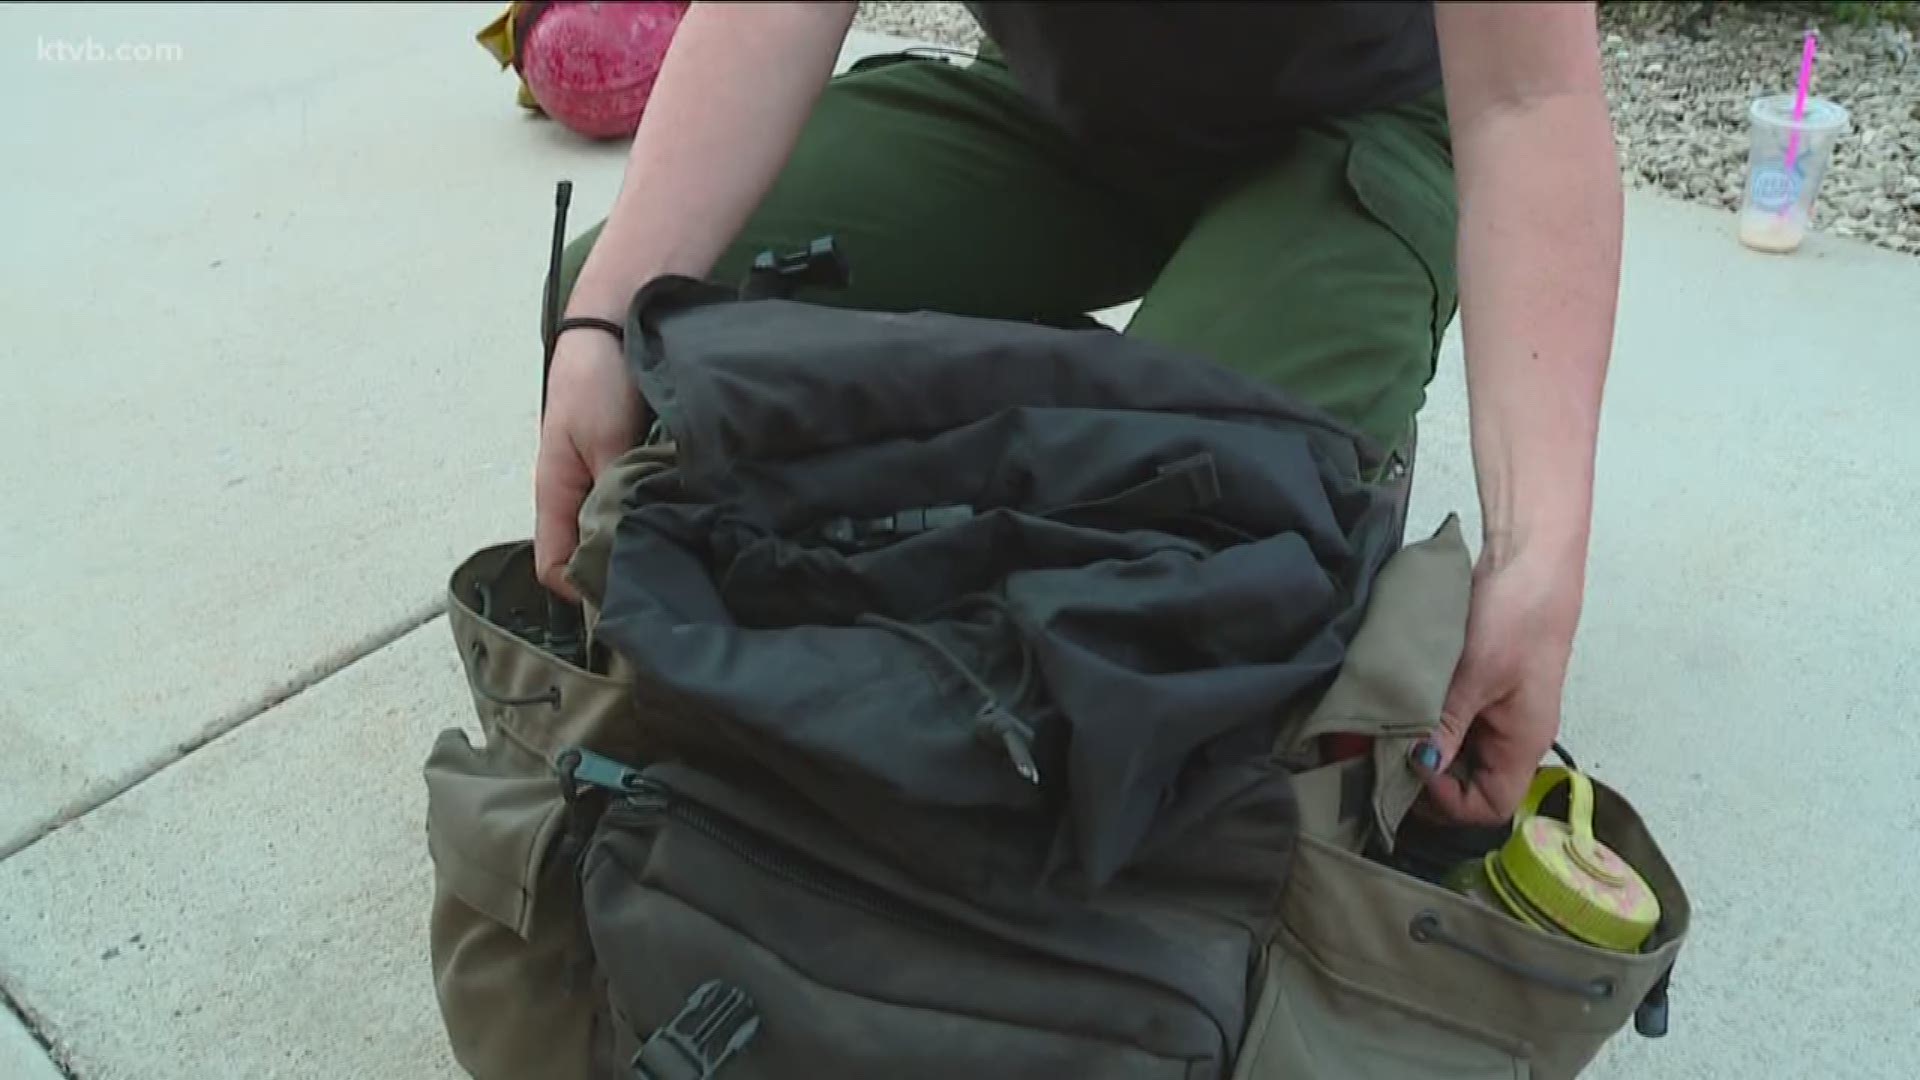 A woman with the Boise District Bureau of Land Management has spearheaded the effort to create uniforms and gear designed specifically for female wildland firefighters.